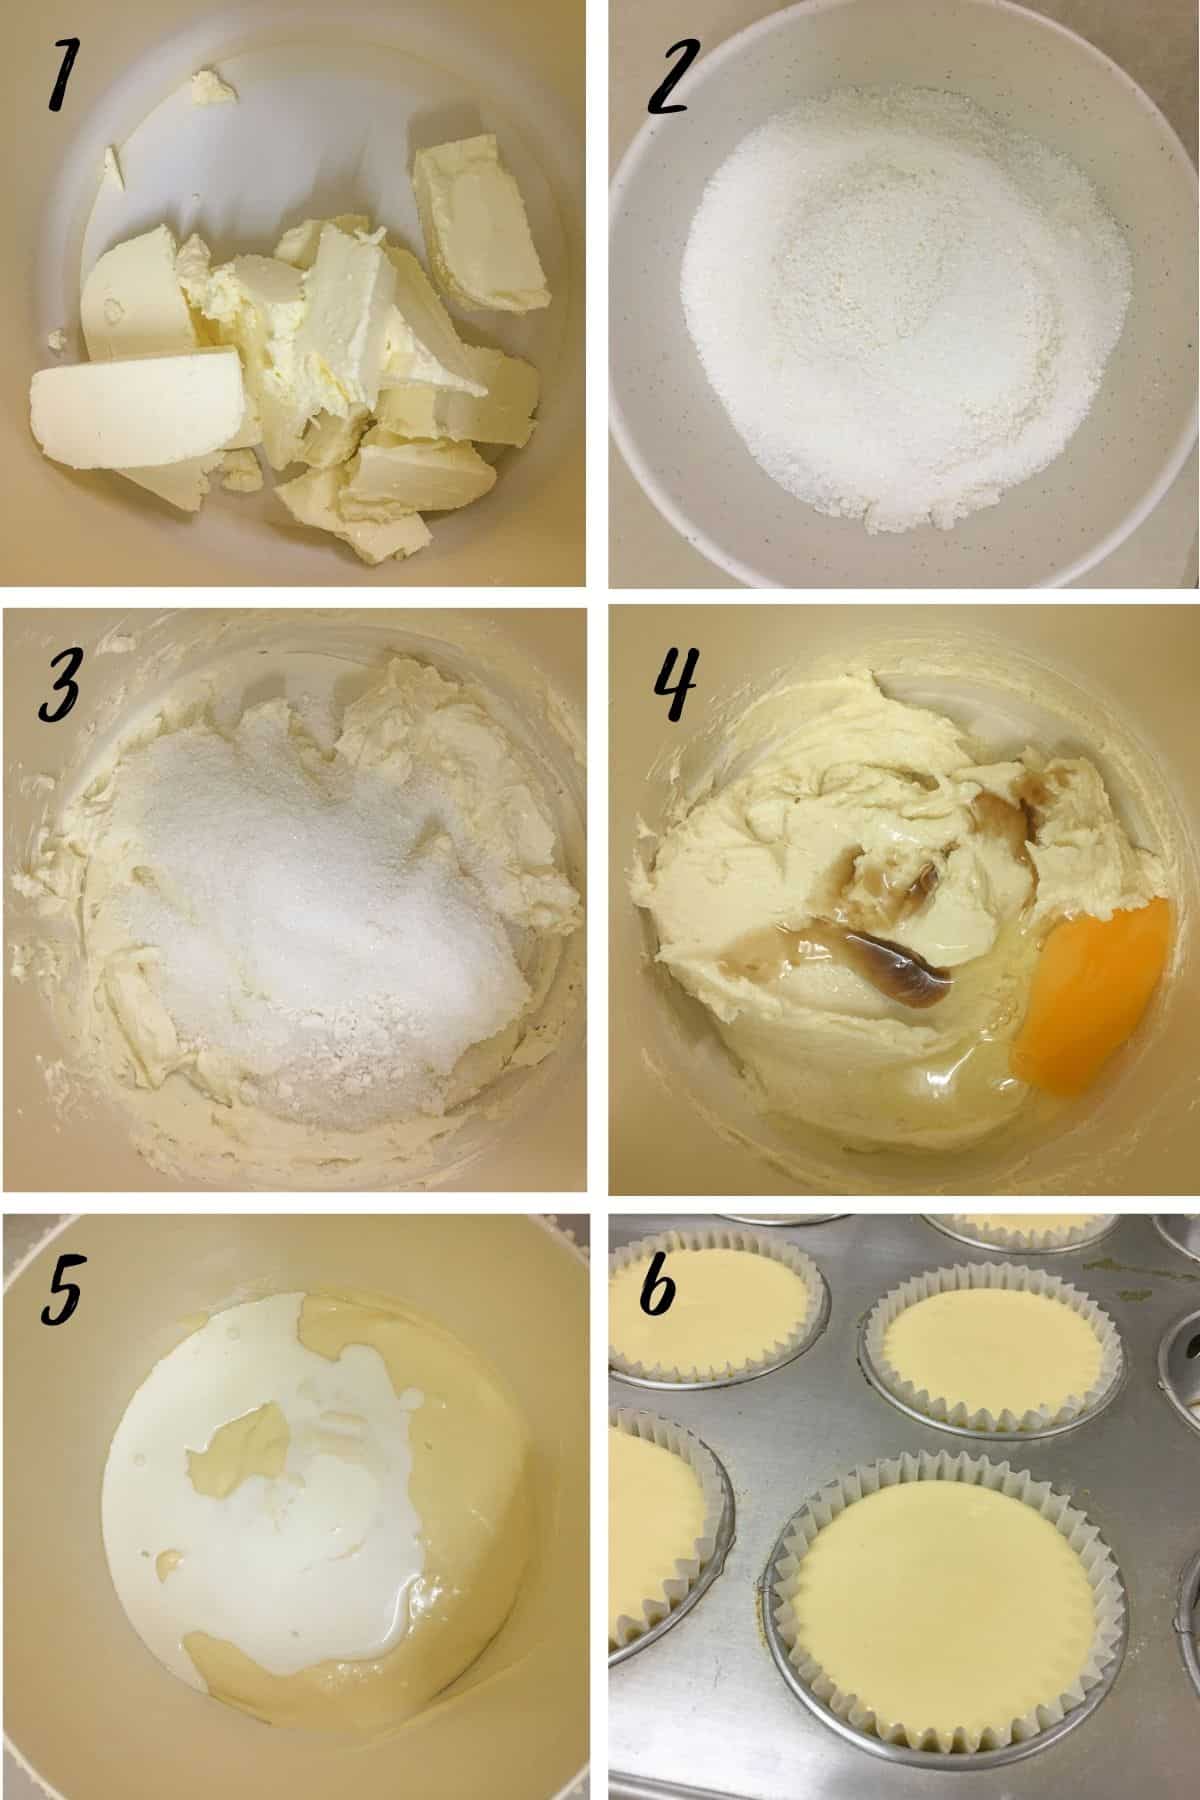 A poster of 6 images showing how to make cheesecake batter